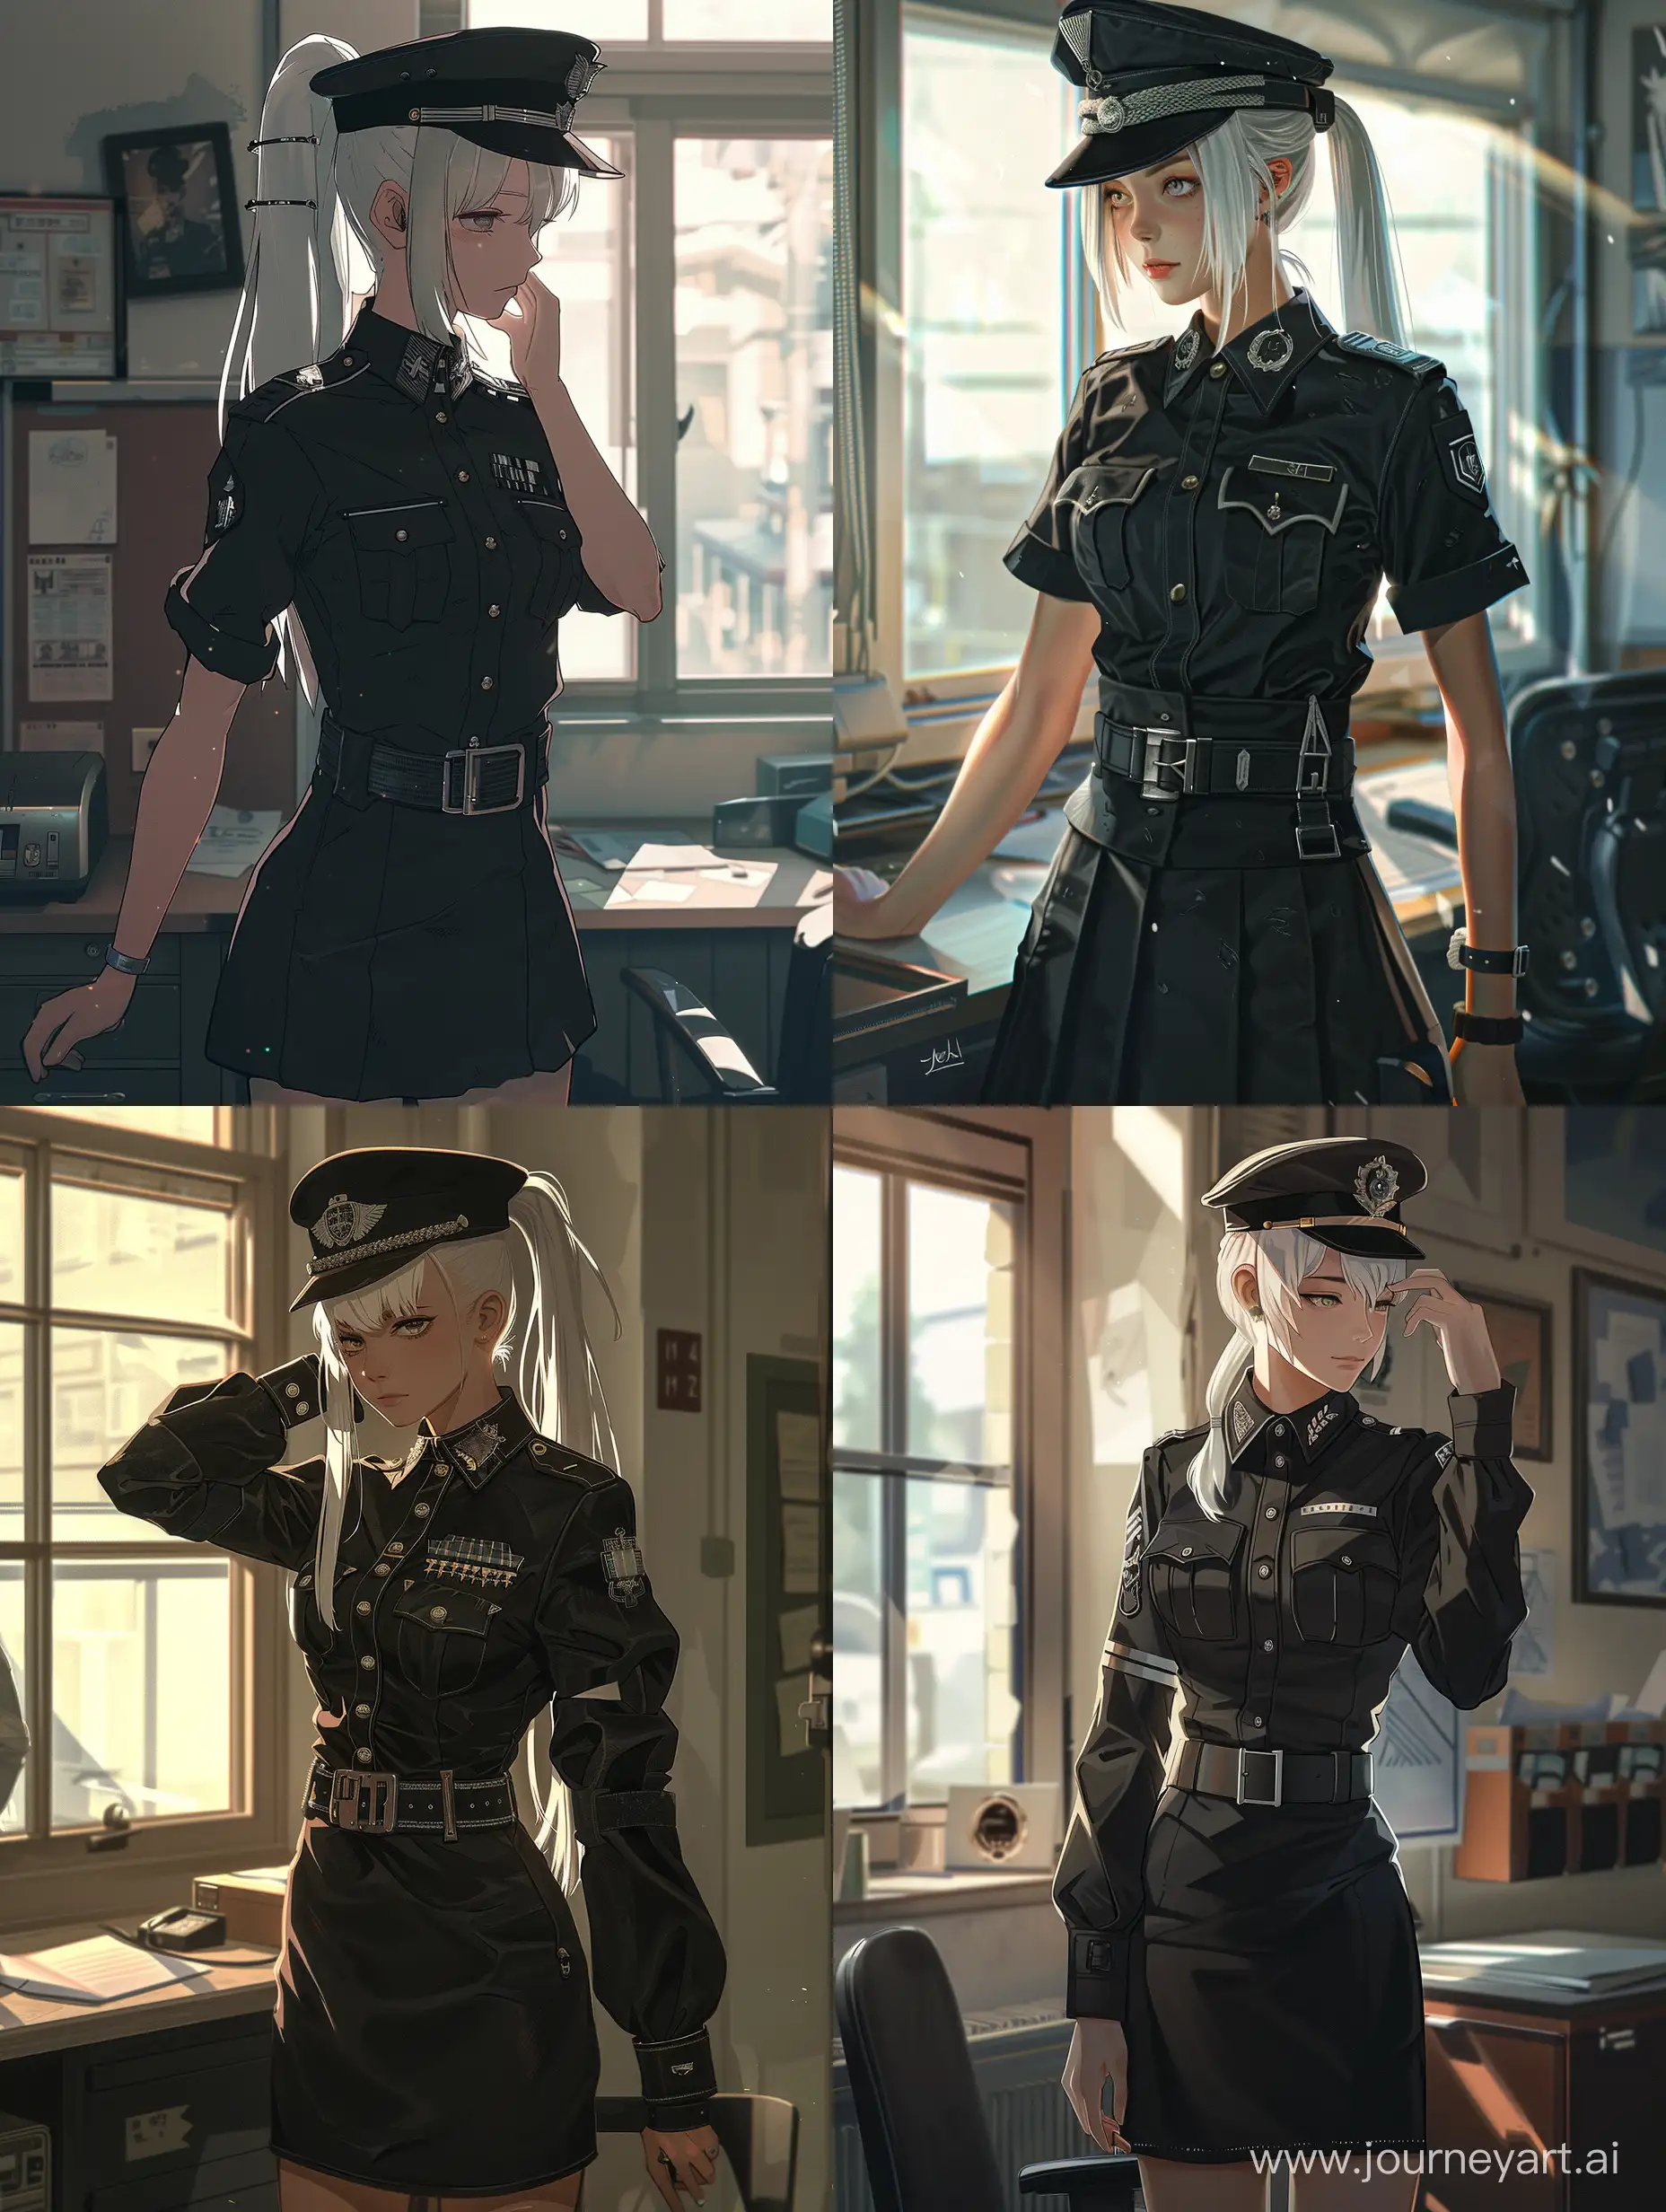 Calm-WhiteHaired-Military-Officer-in-AnimeInspired-Uniform